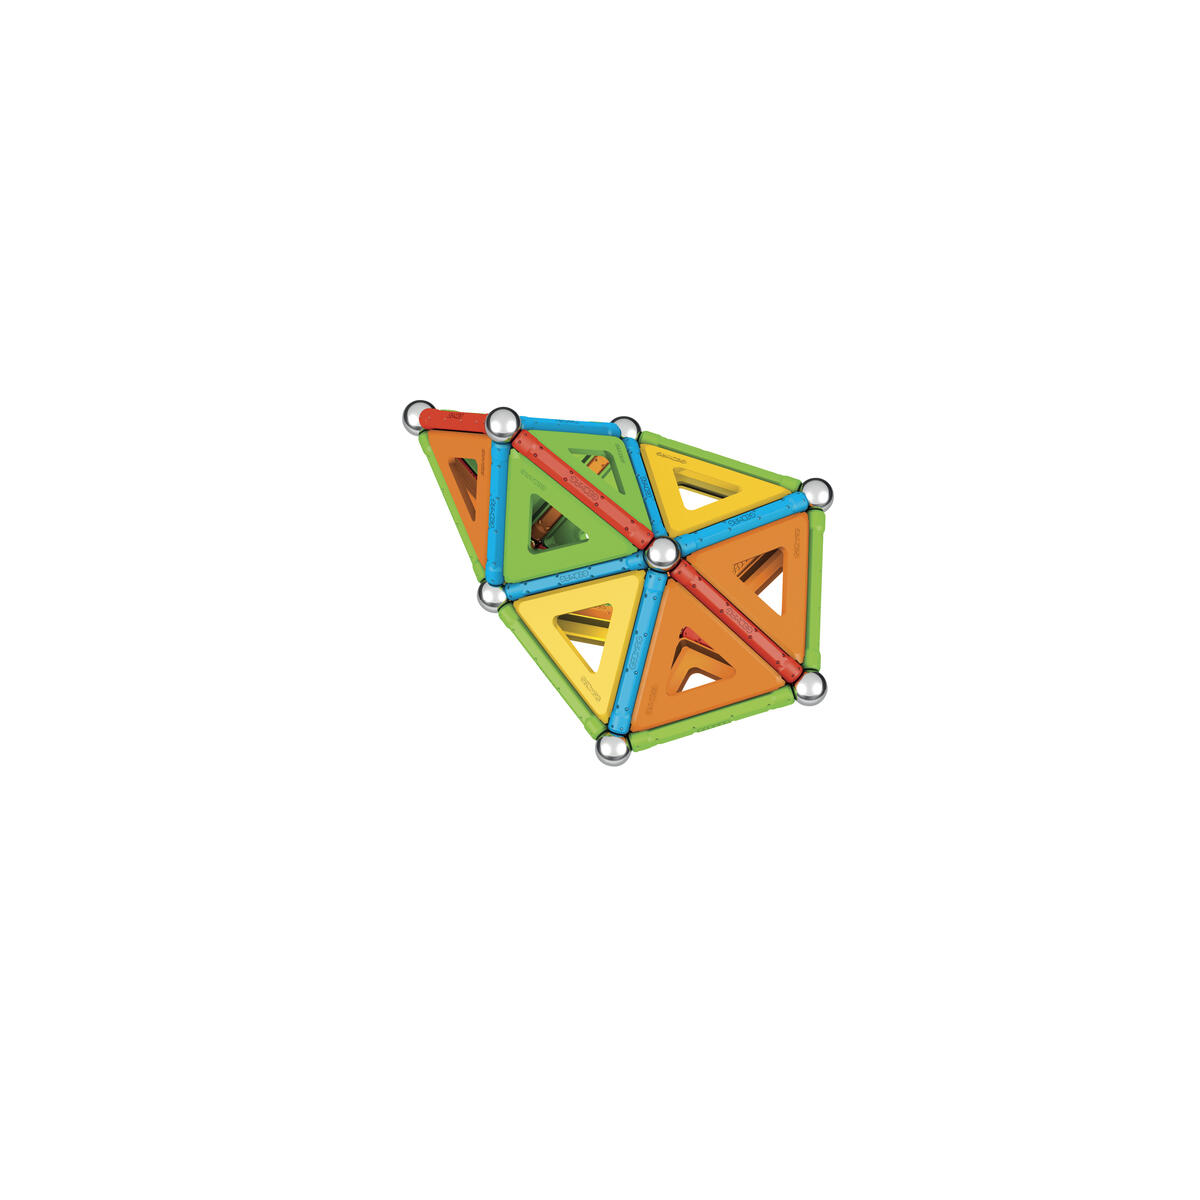 Geomag™ Supercolor Recycled, 78 Pieces